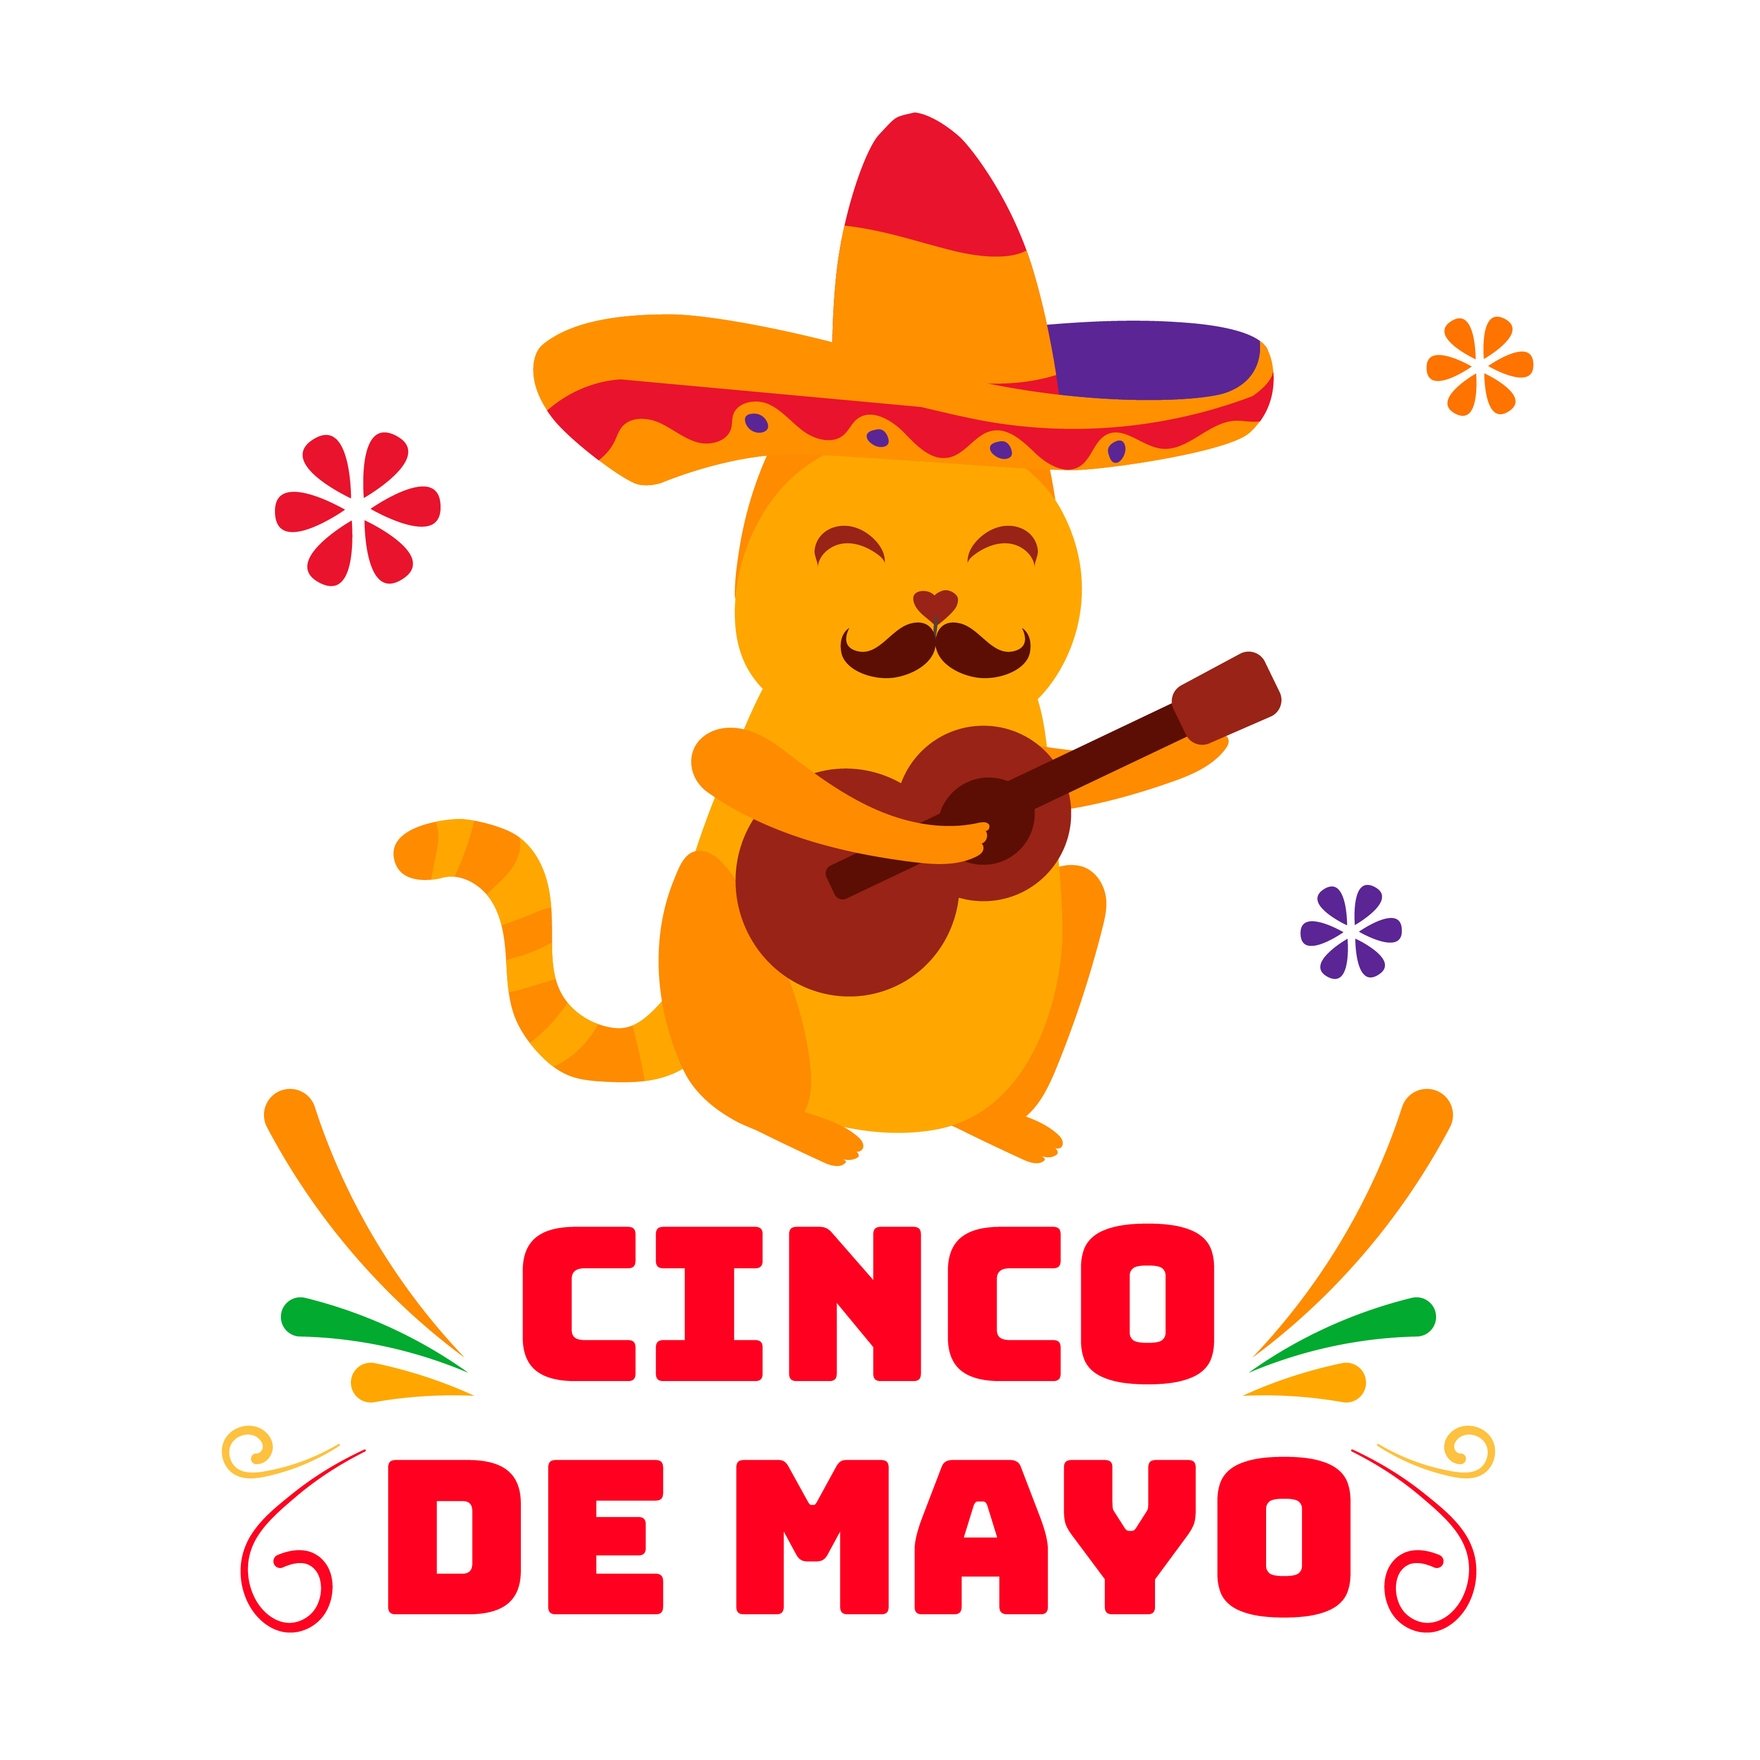 Free Cinco De Mayo Cat Gif in Illustrator, EPS, SVG, JPG, GIF, PNG, After Effects